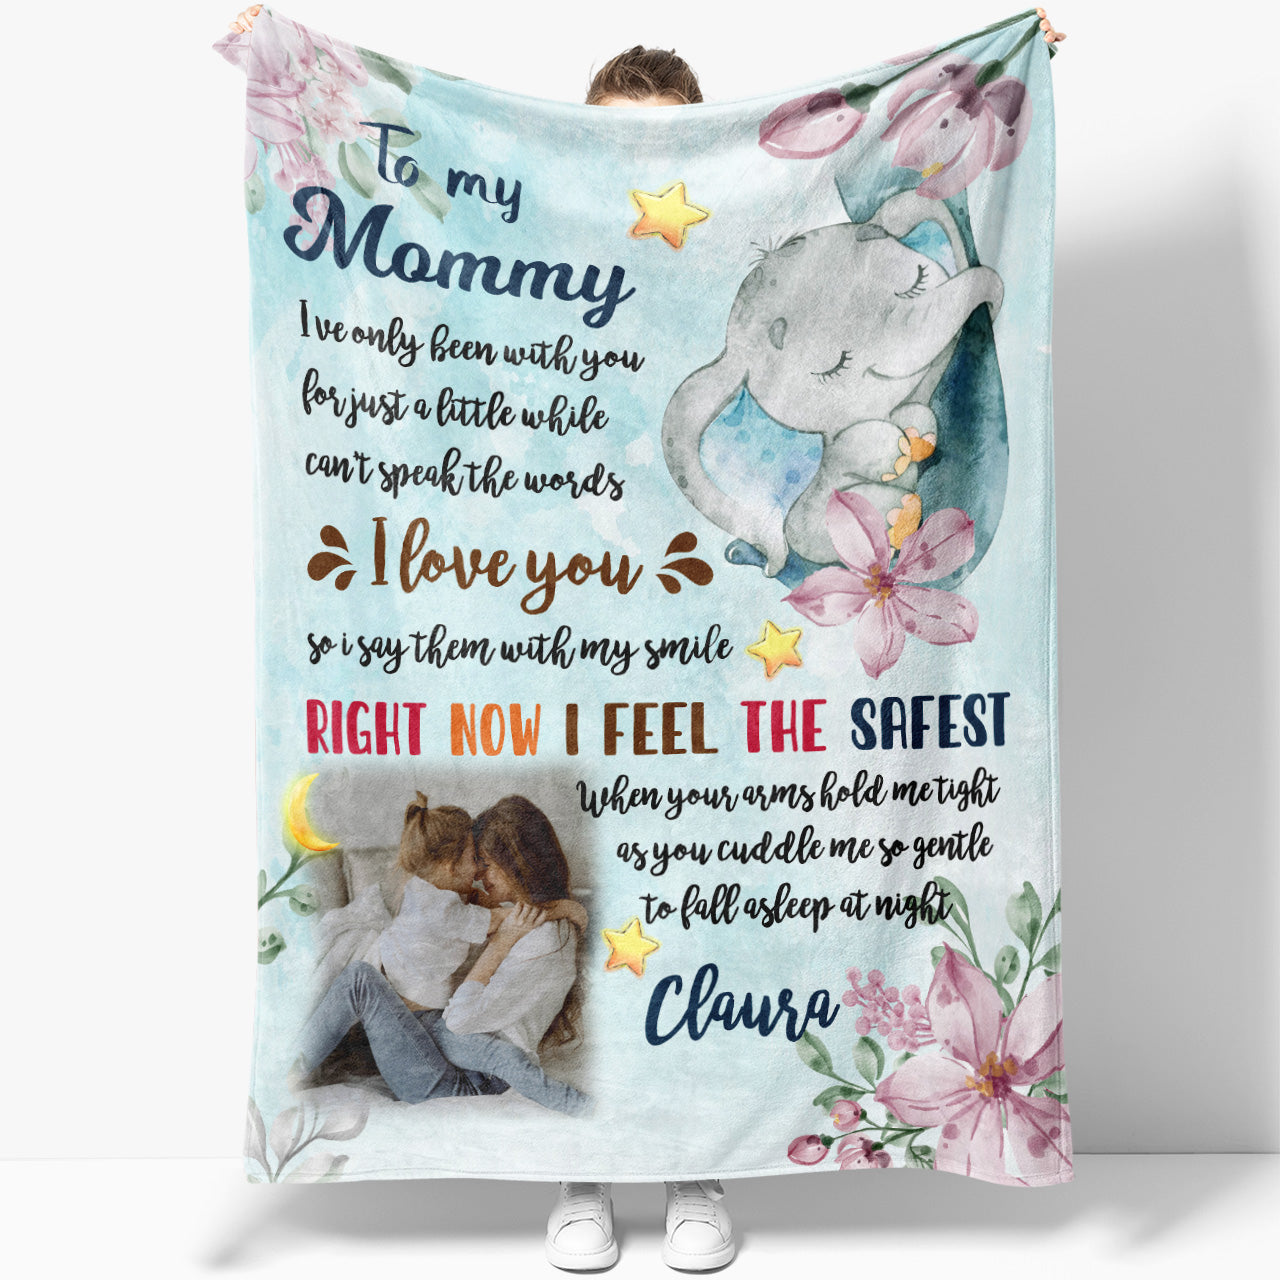 Personalized To My Mommy Blanket, Cute Elephant Blanket, 1st Mother's Day Gift, Blanket